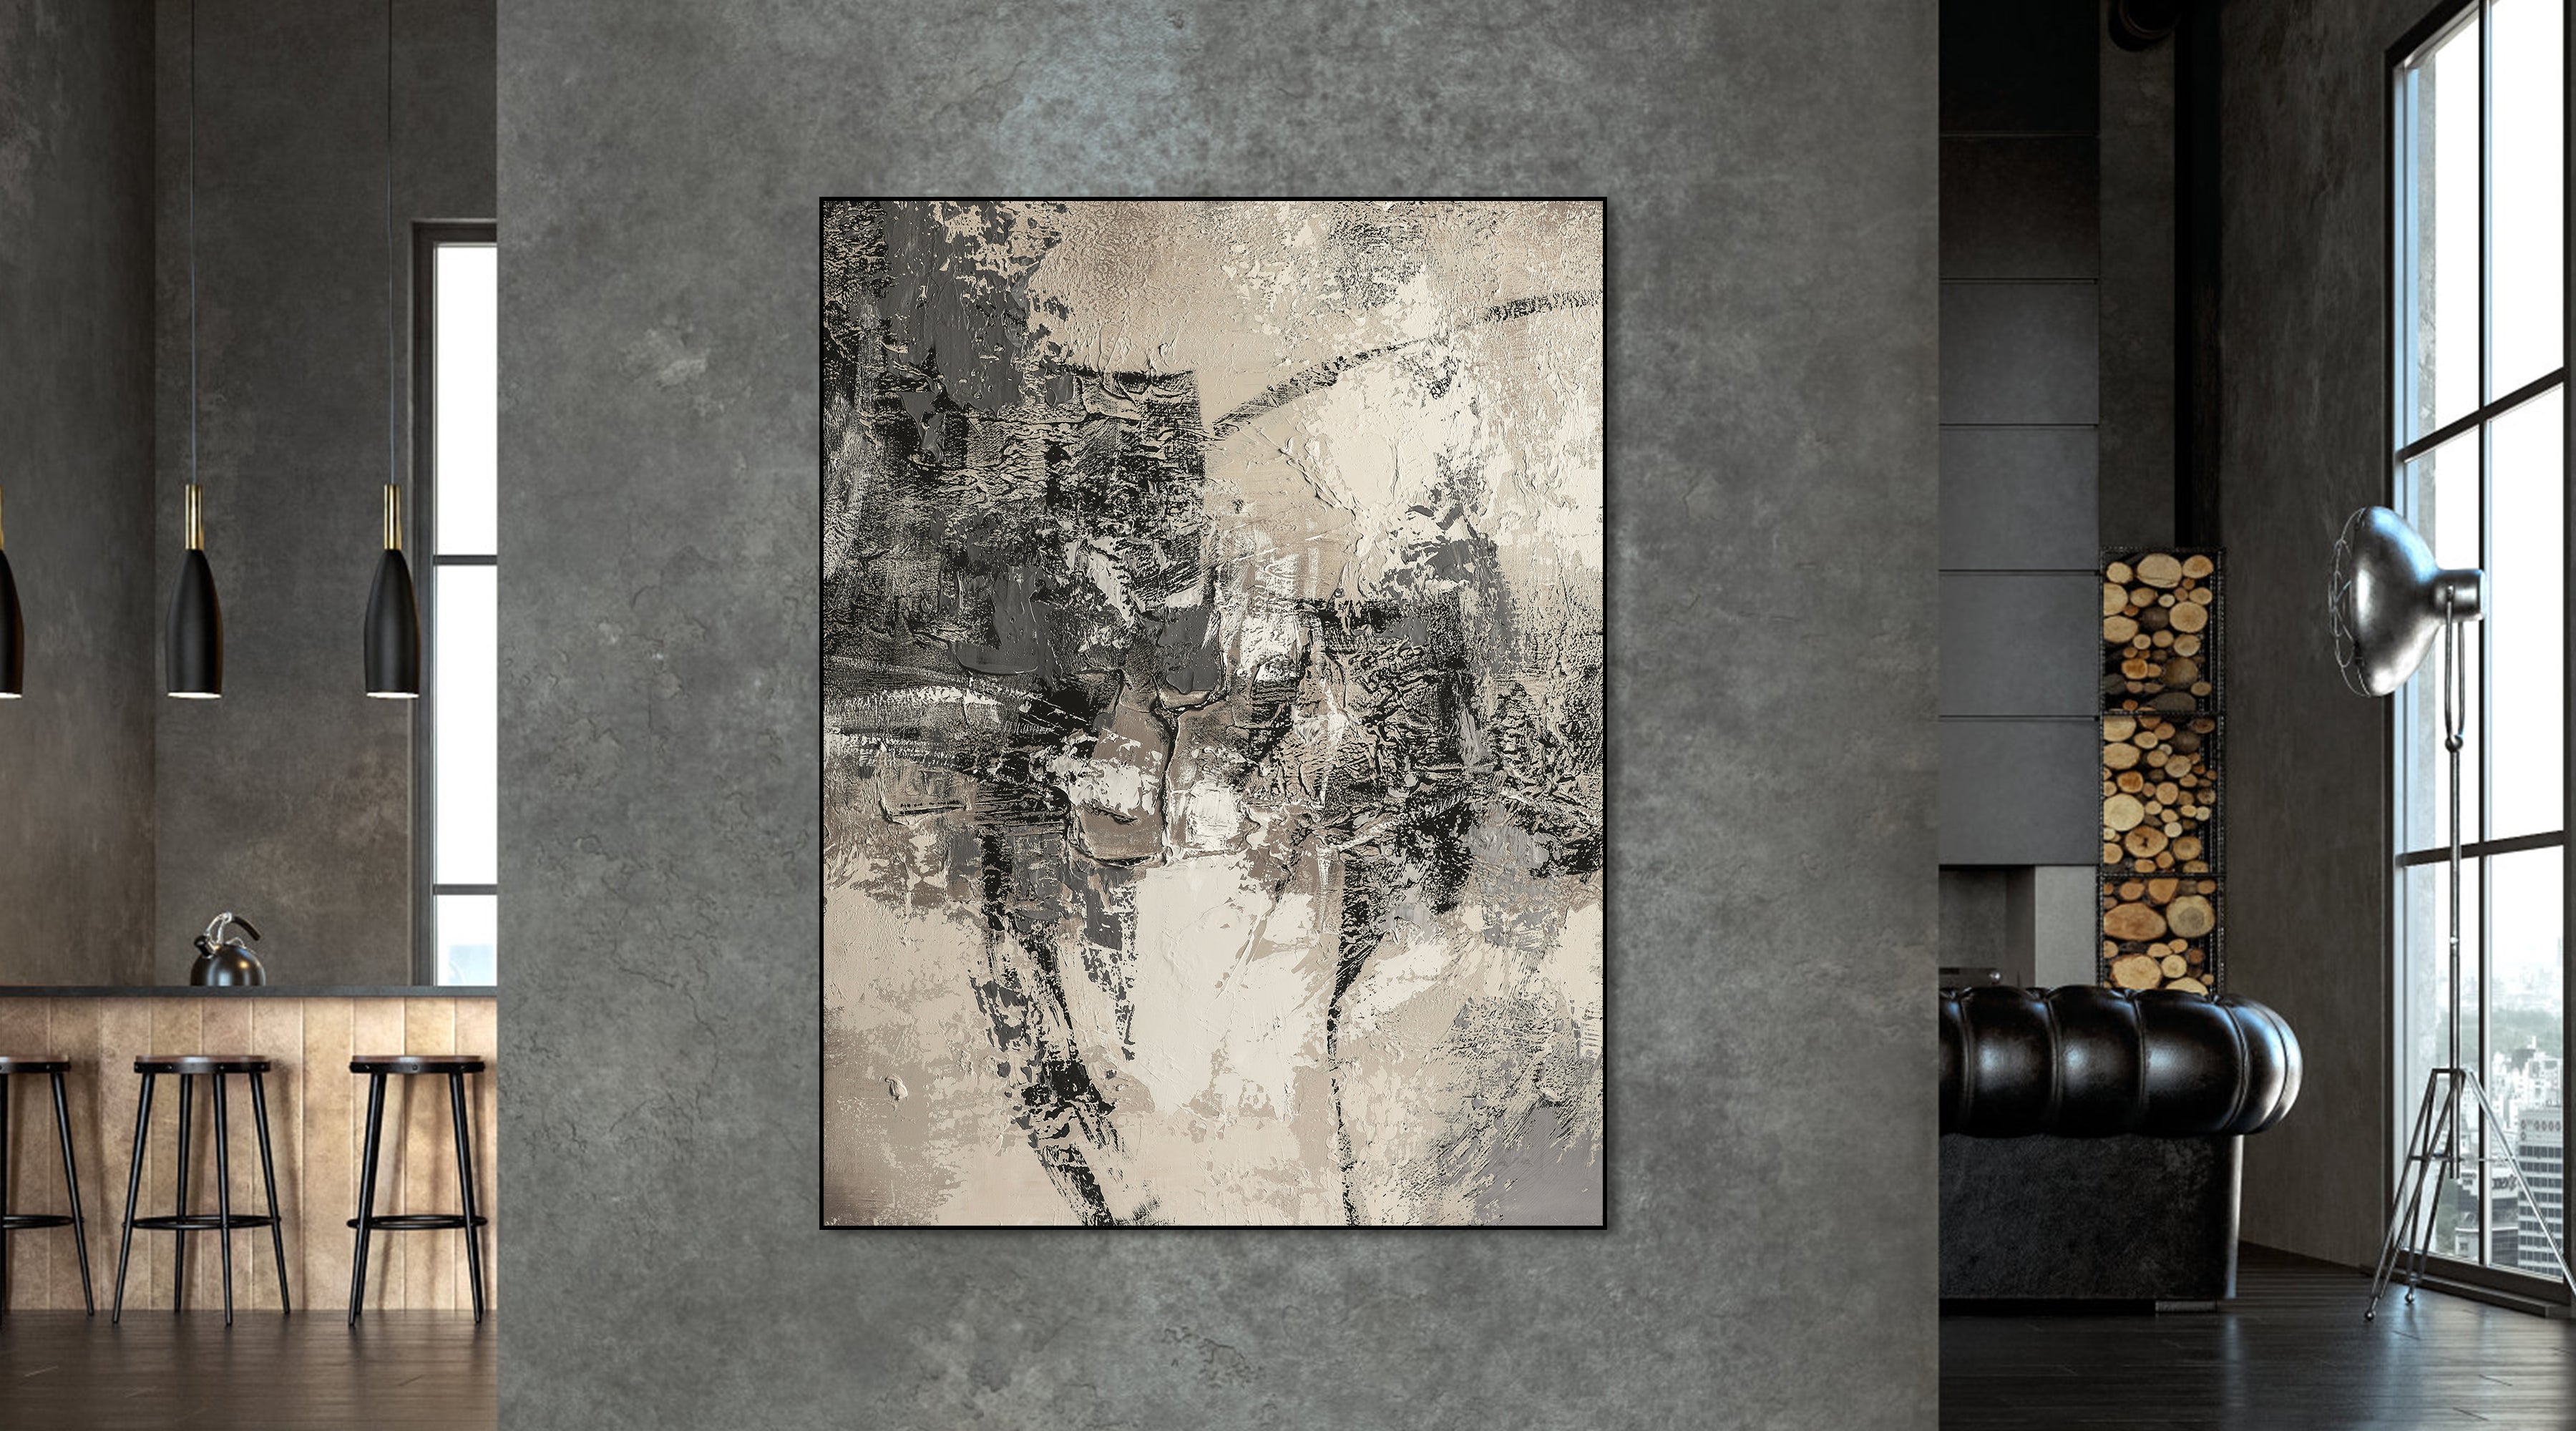 Black & white&gray texture abstract artwork #ypy005